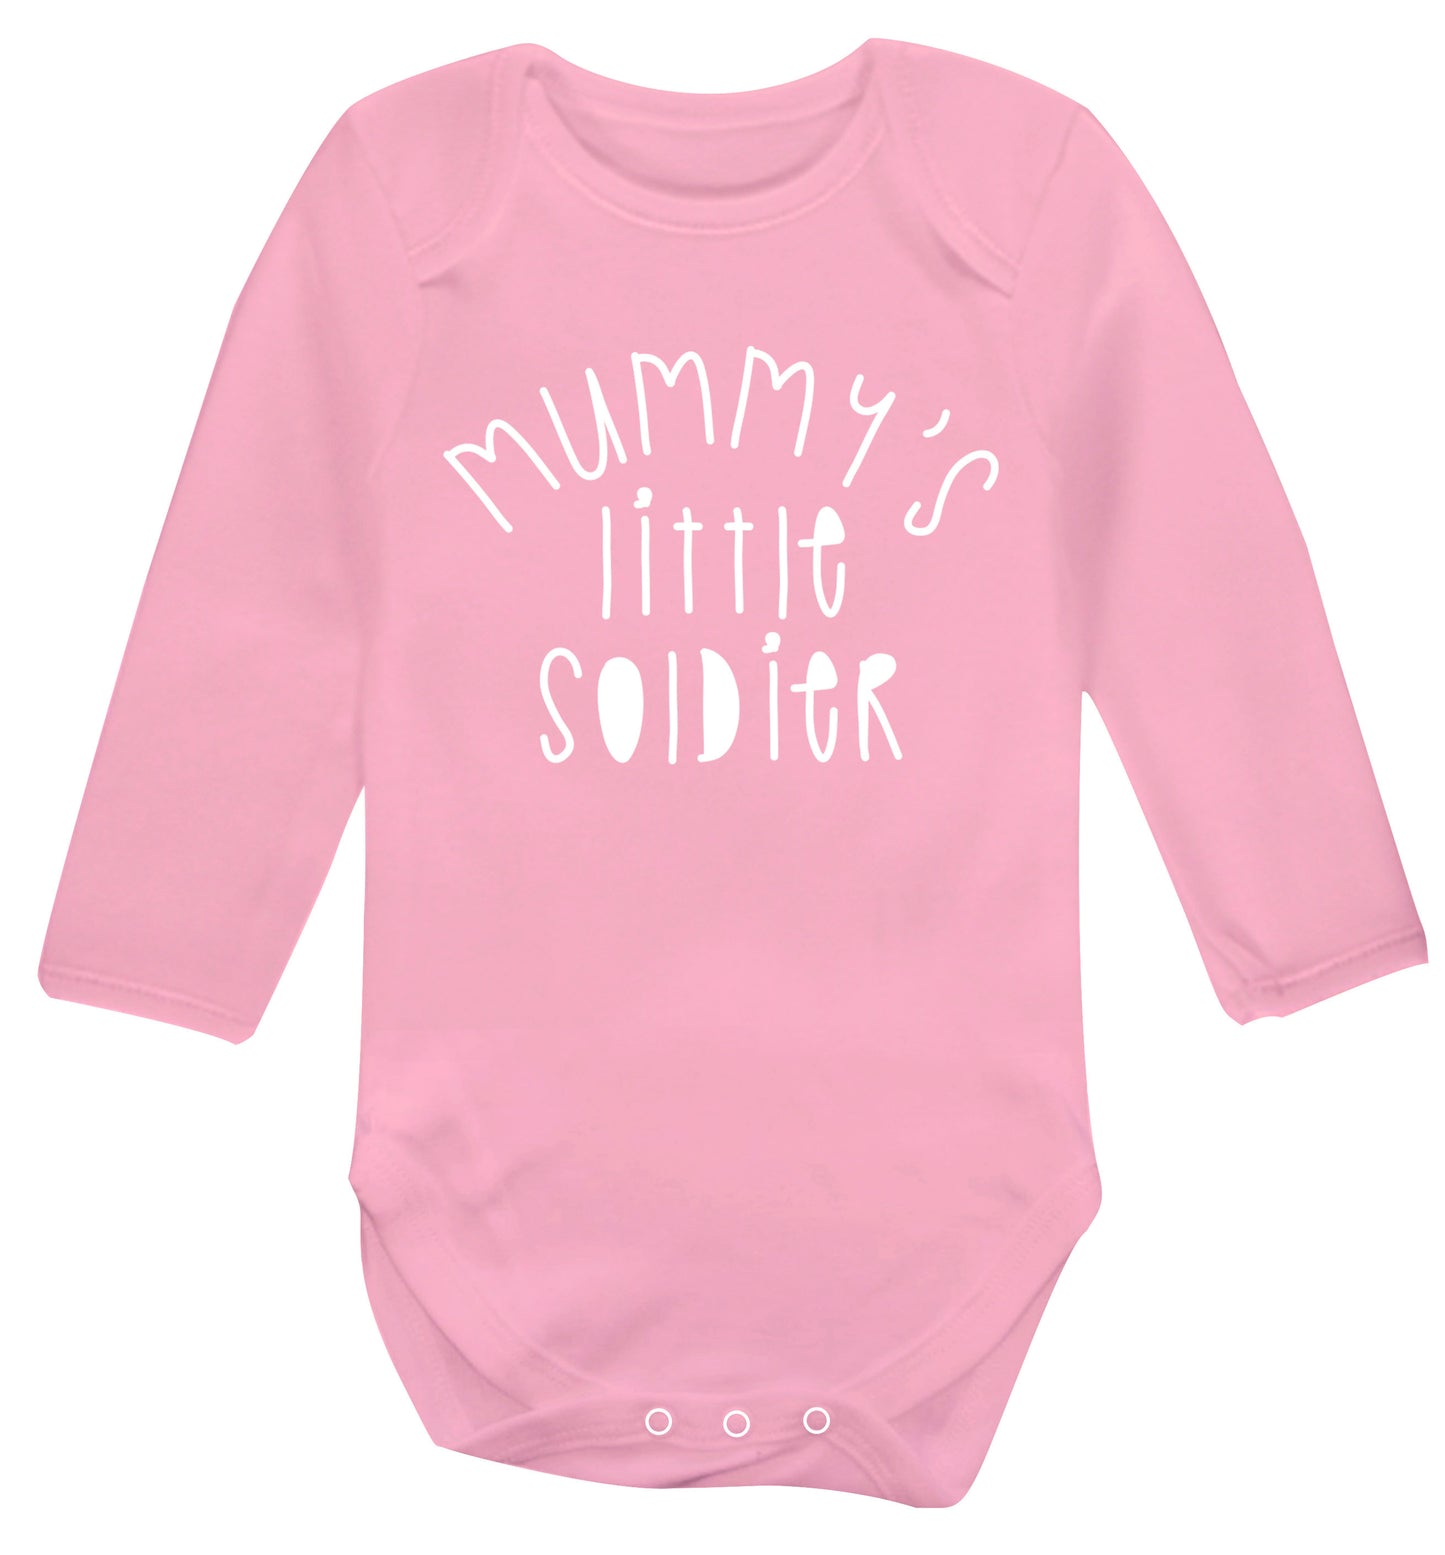 Mummy's little soldier Baby Vest long sleeved pale pink 6-12 months